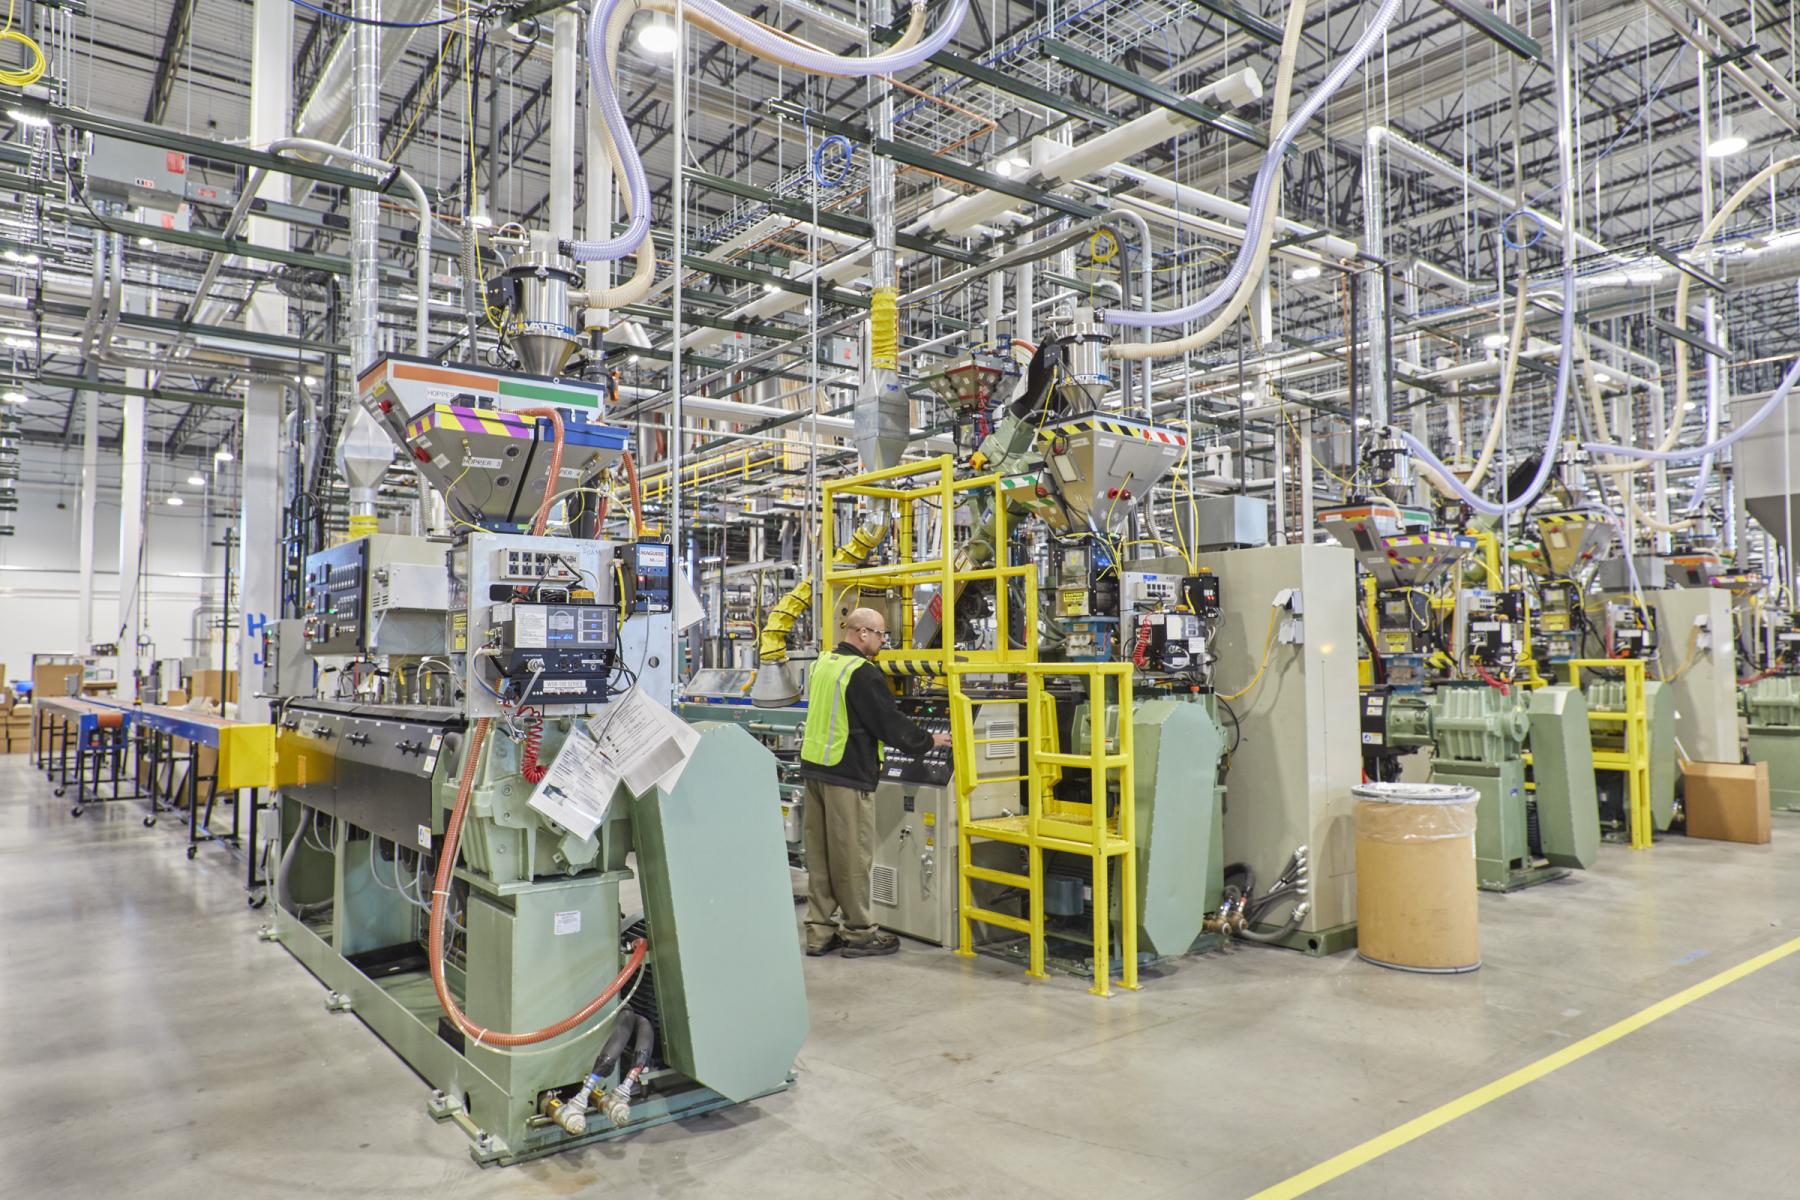 Manufacturing facility used to electroform products